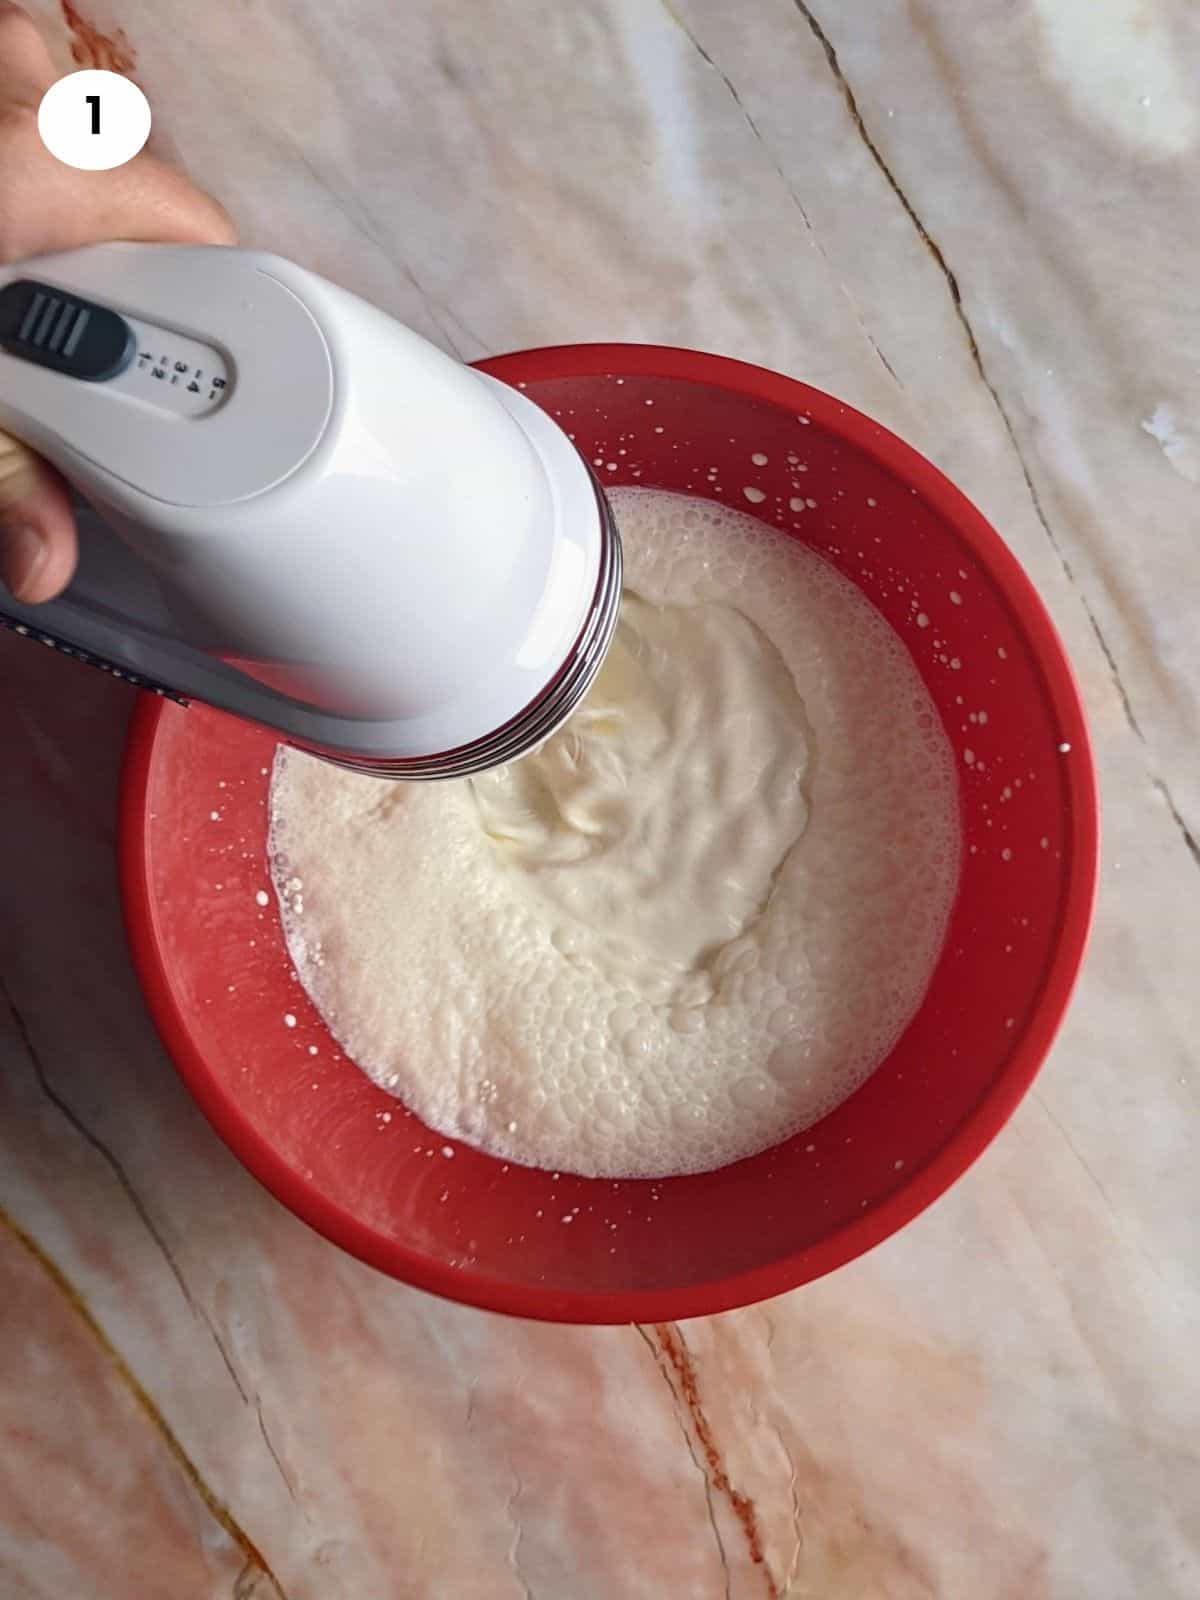 Start mixing the ingredients to make whipped cream.